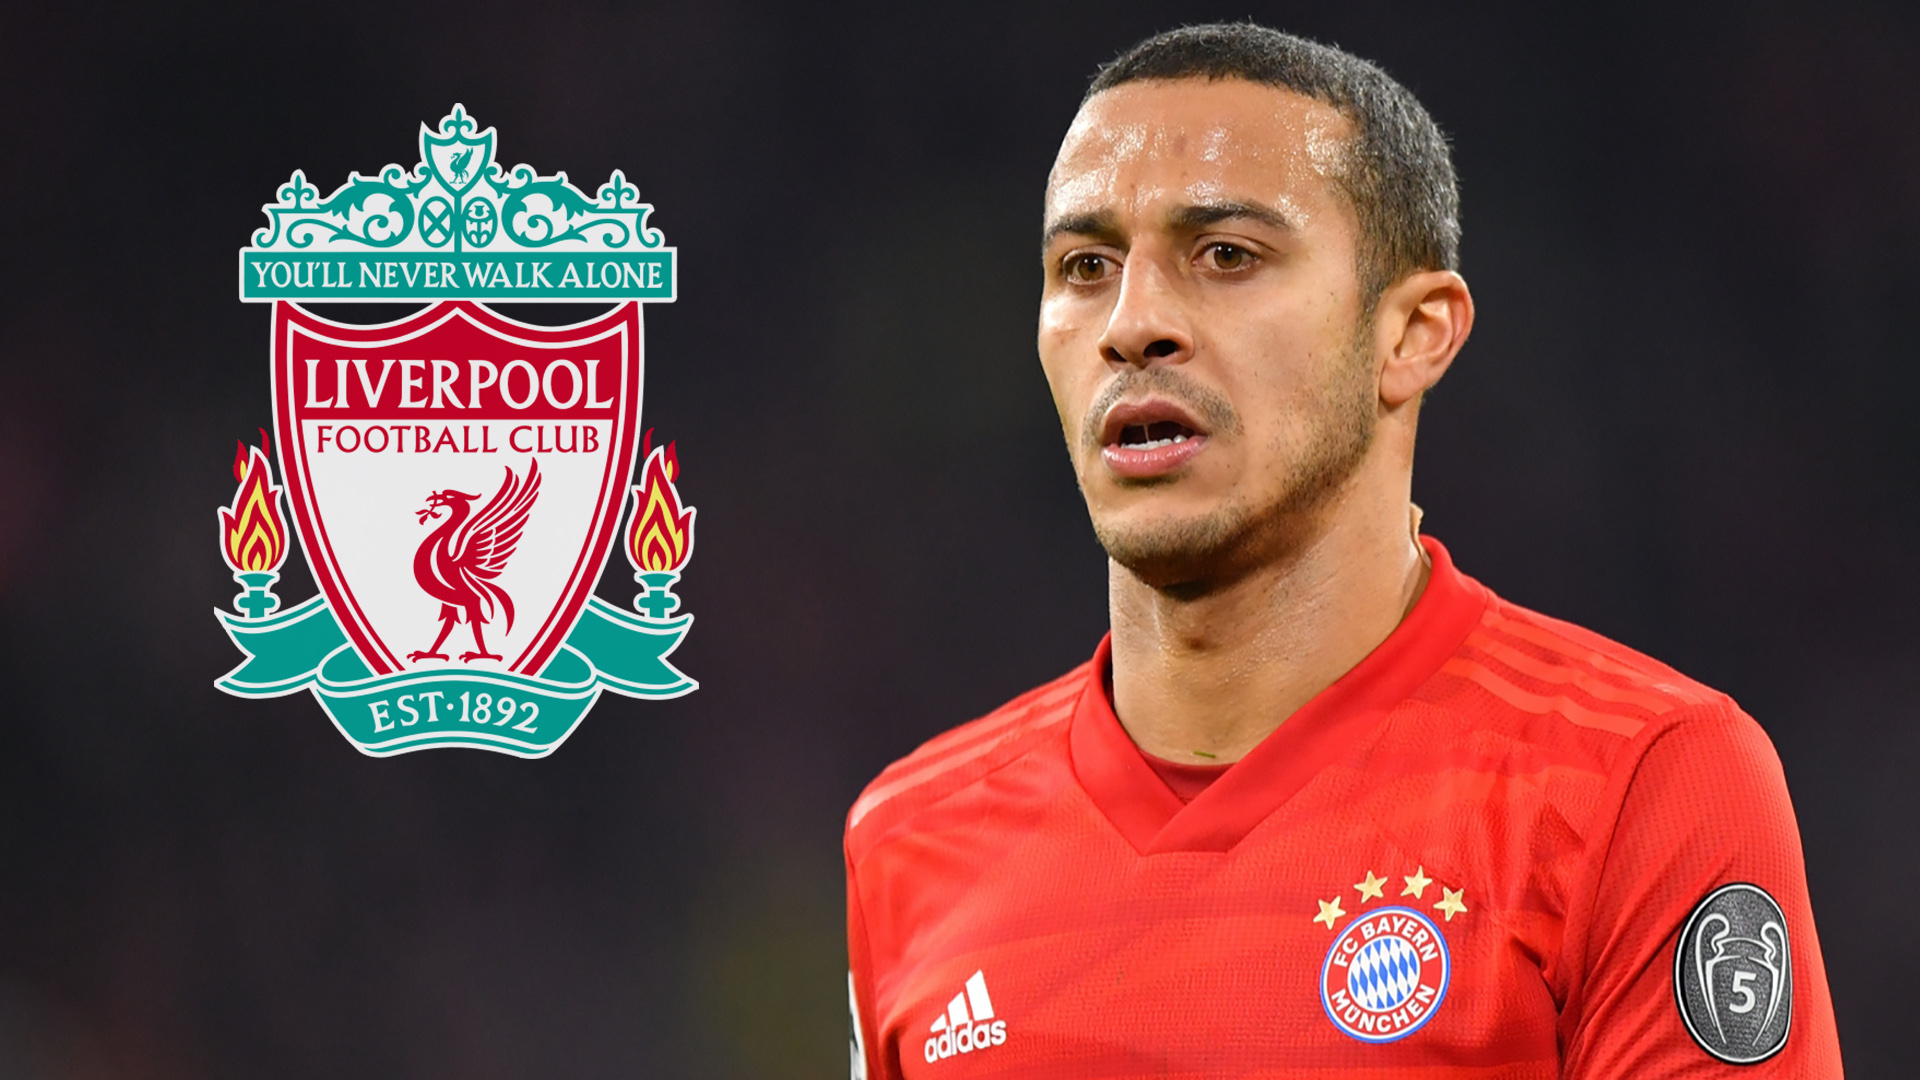 'Thiago is a great player' - Klopp repeats praise for Bayern Munich star as Liverpool rumours persist